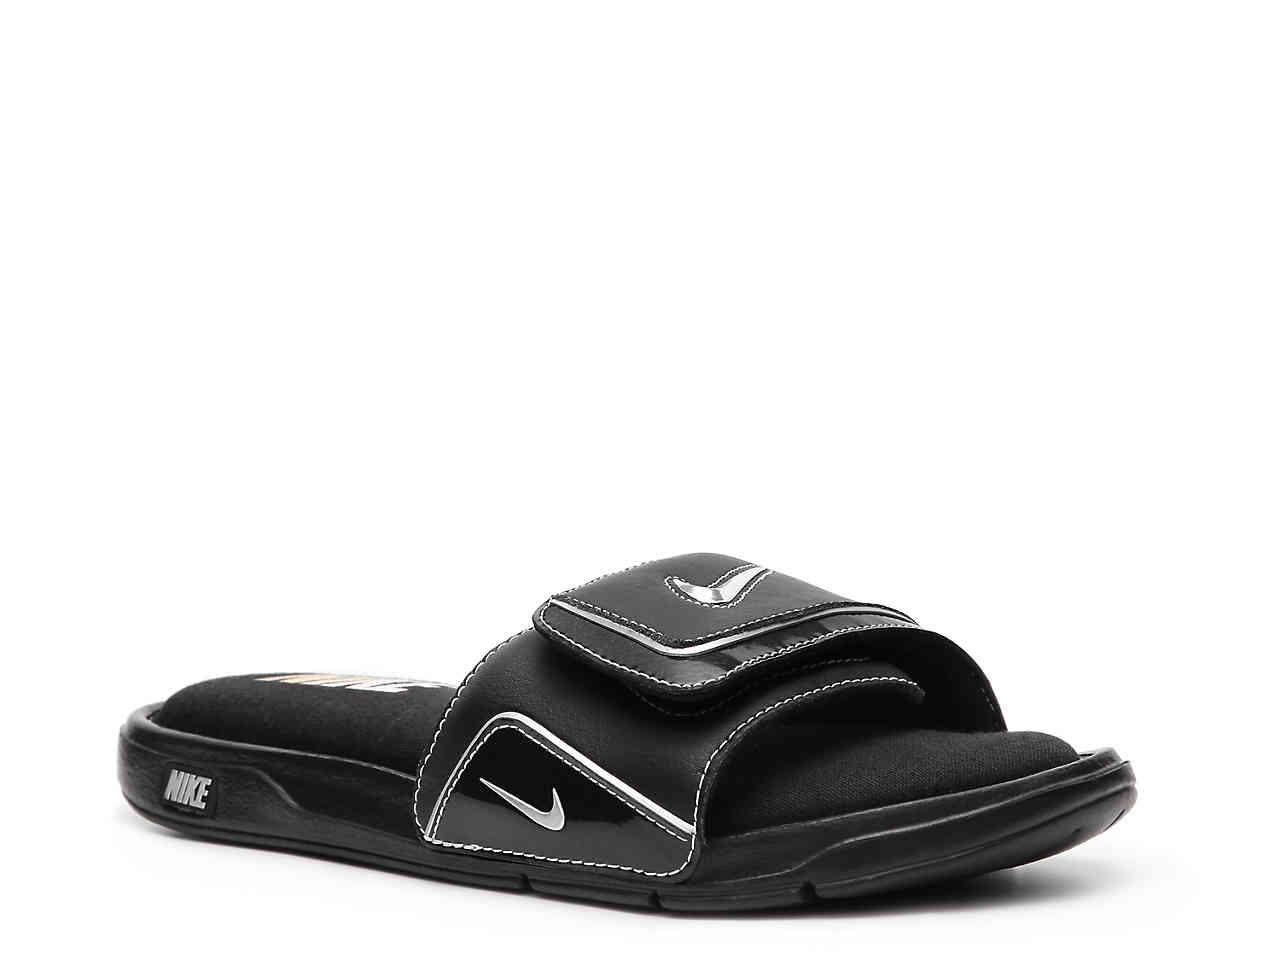 Up To 50% Off on VONMAY Men's Slippers Two-Ton... | Groupon Goods